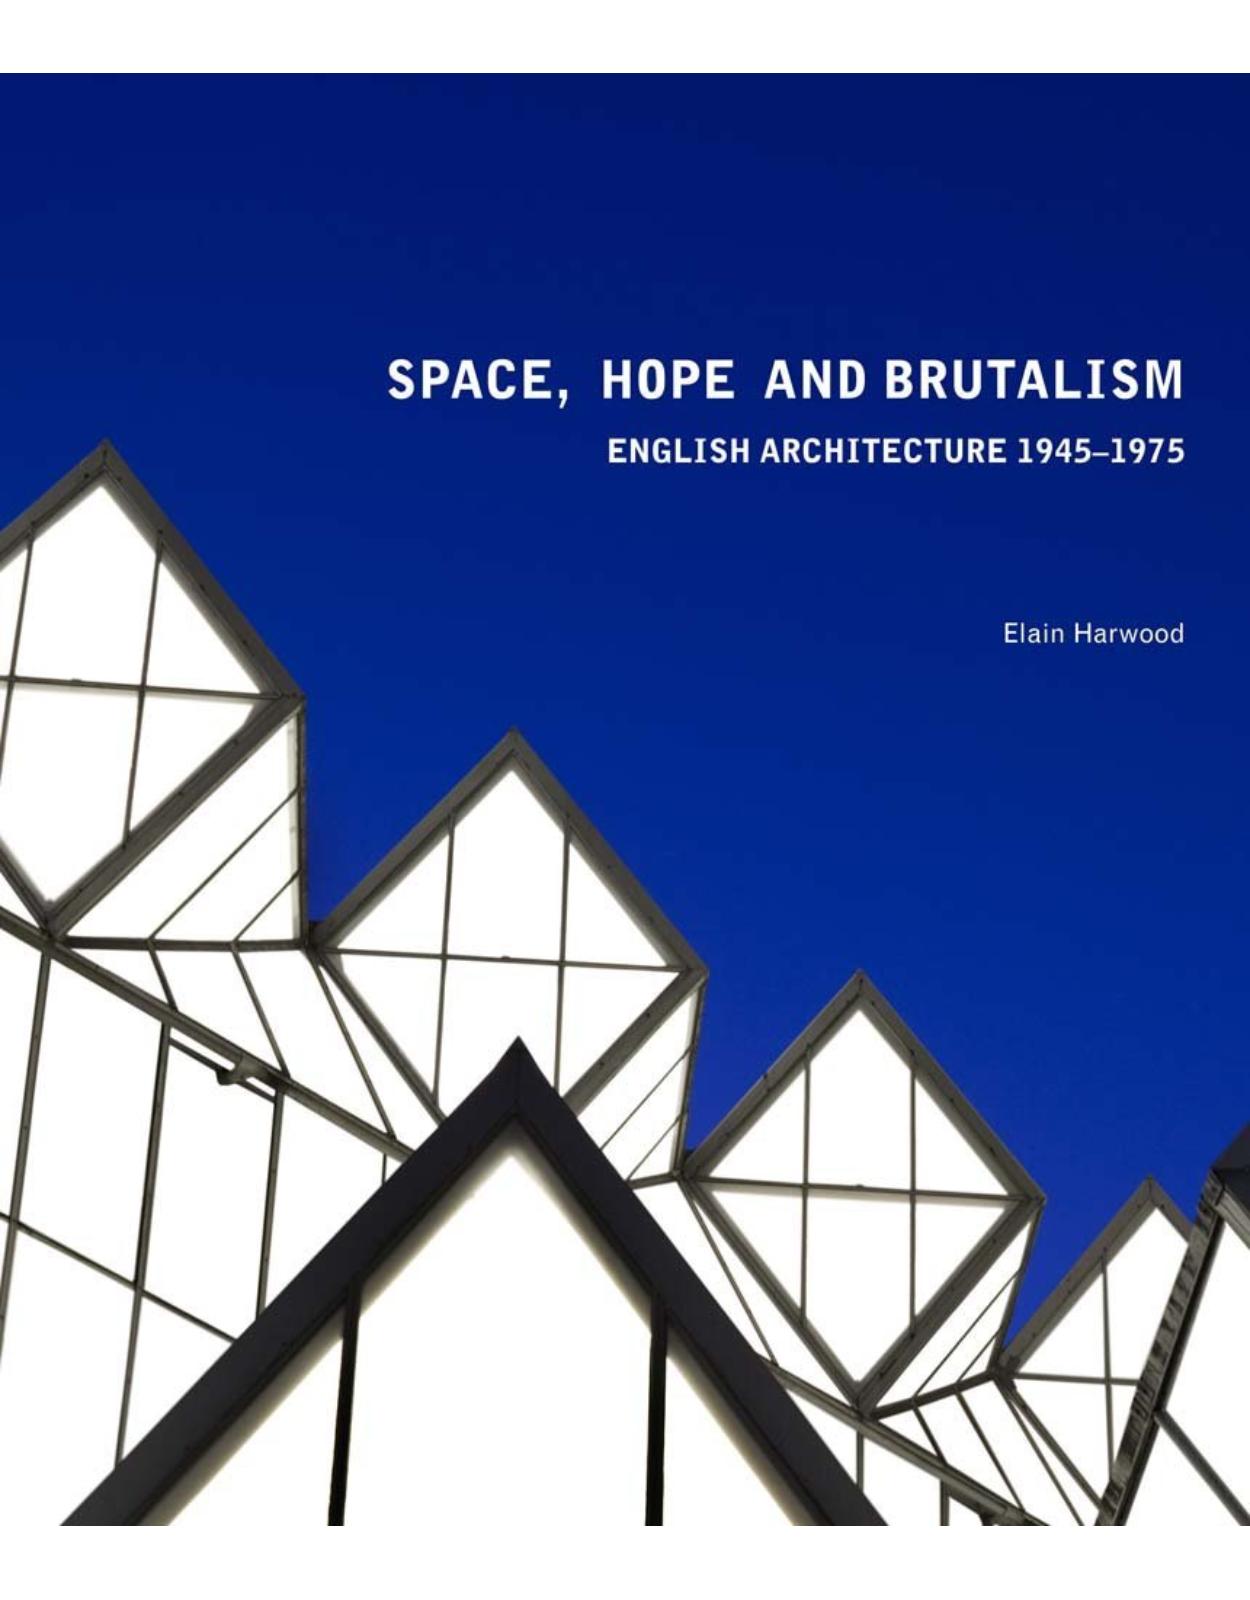 Space, Hope and Brutalism. Engleza Architecture, 1945-1975